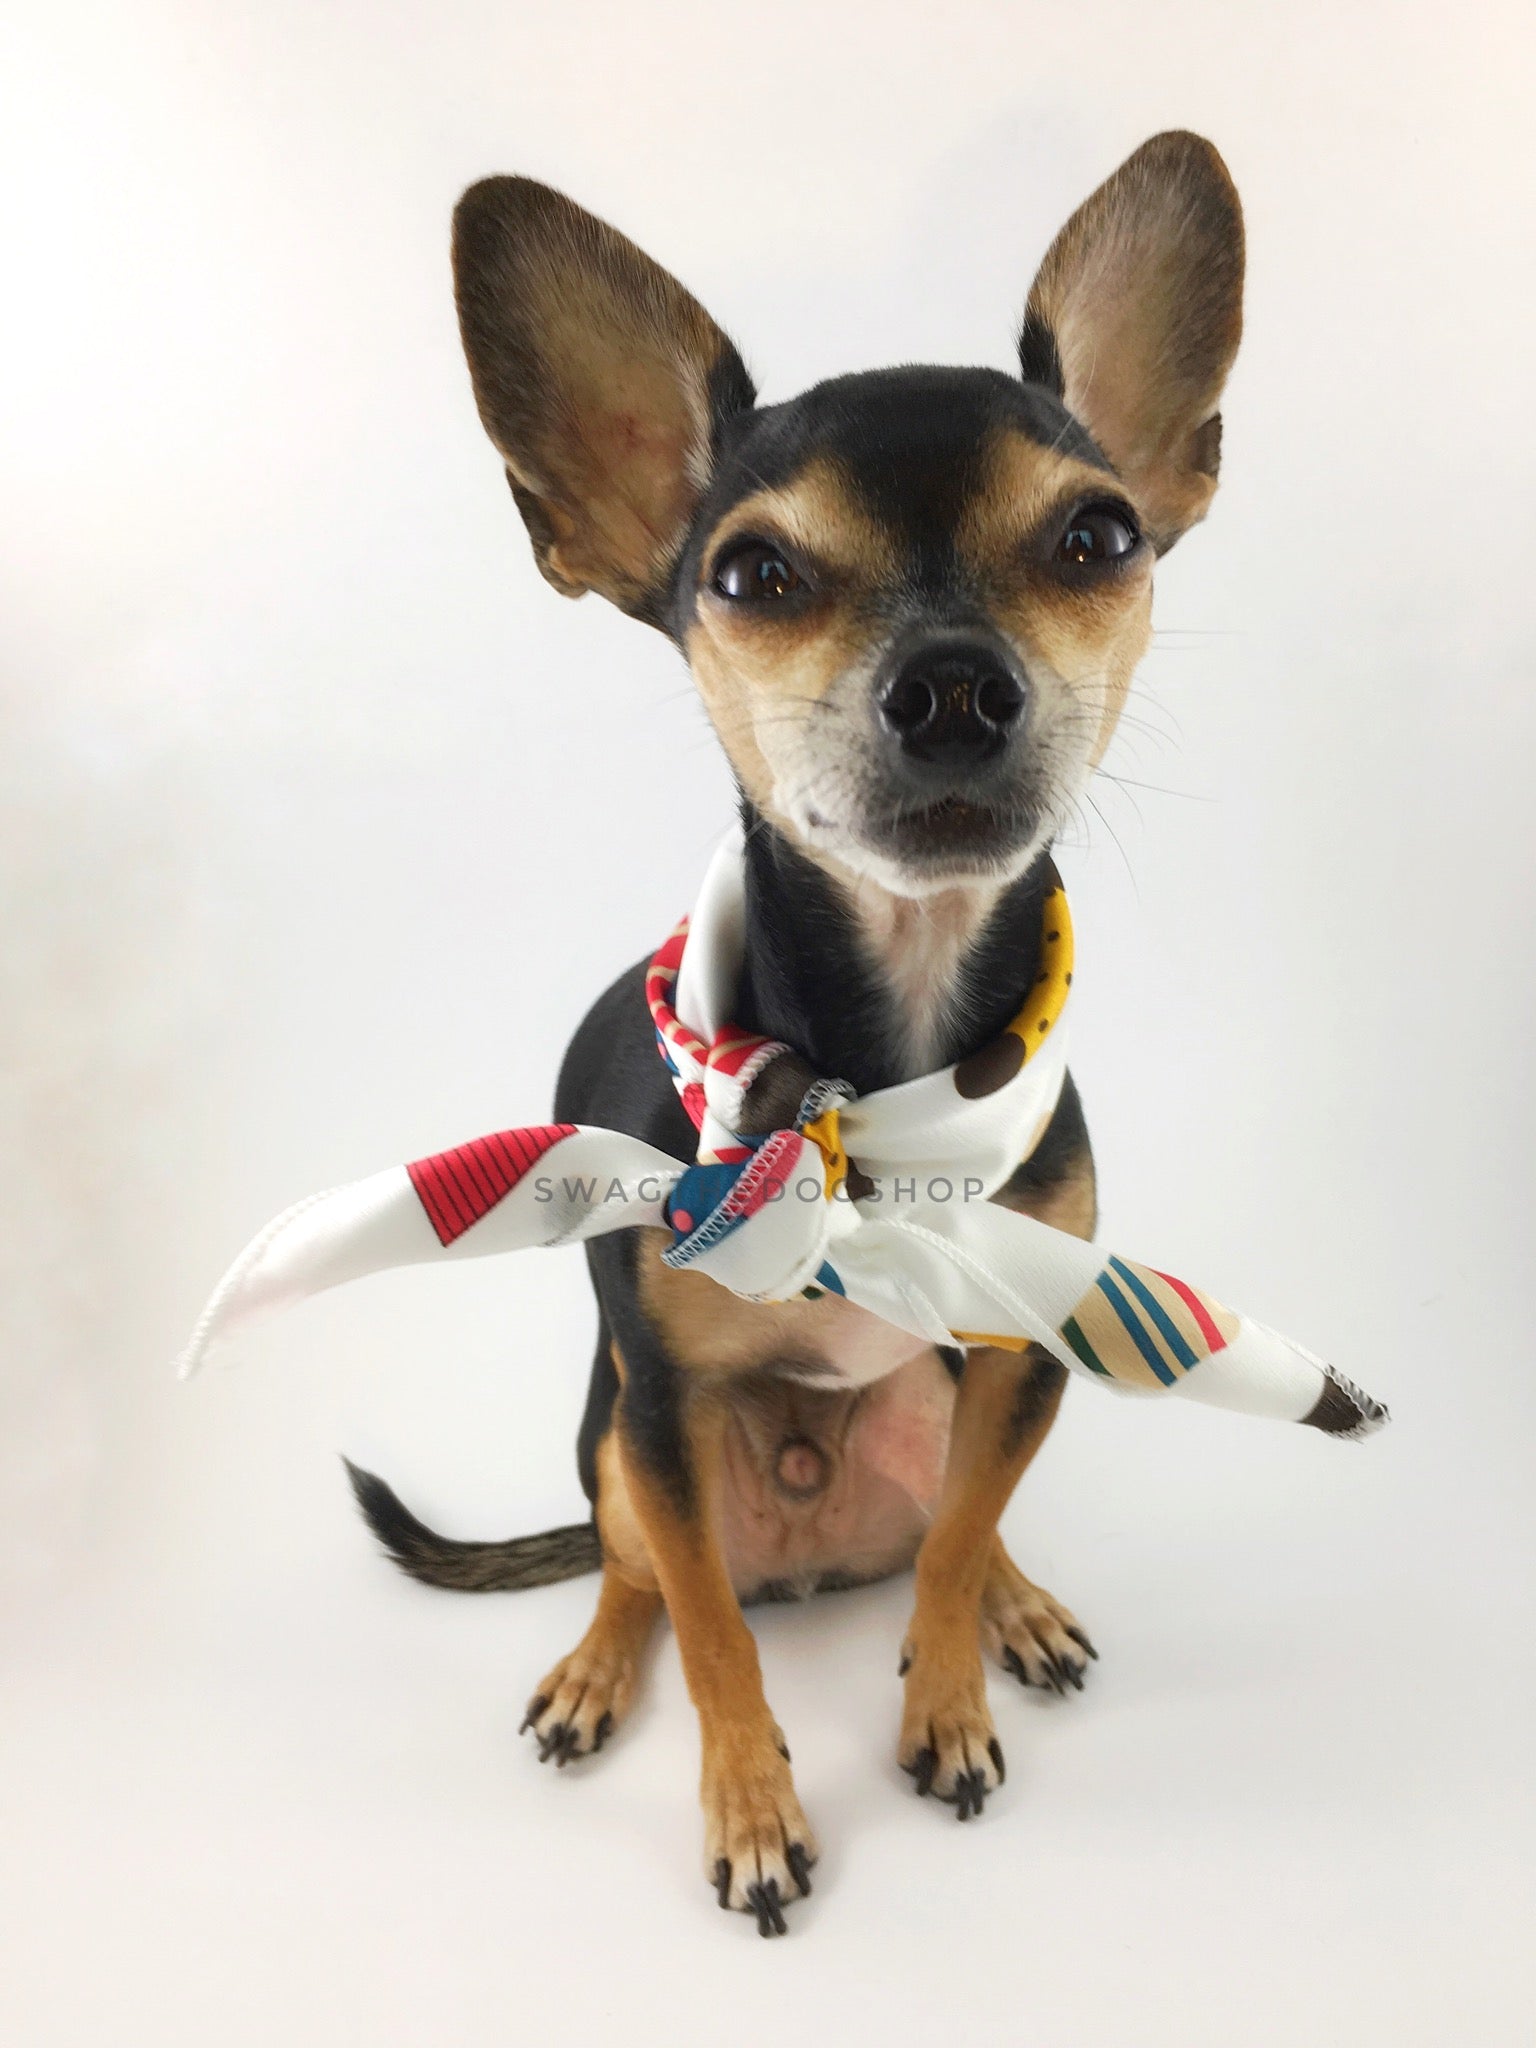 Rock Your Socks Swagdana Scarf - Full Frontal View of Cute Chihuahua Wearing Swagdana Scarf as Neck Scarf. Dog Bandana. Dog Scarf.